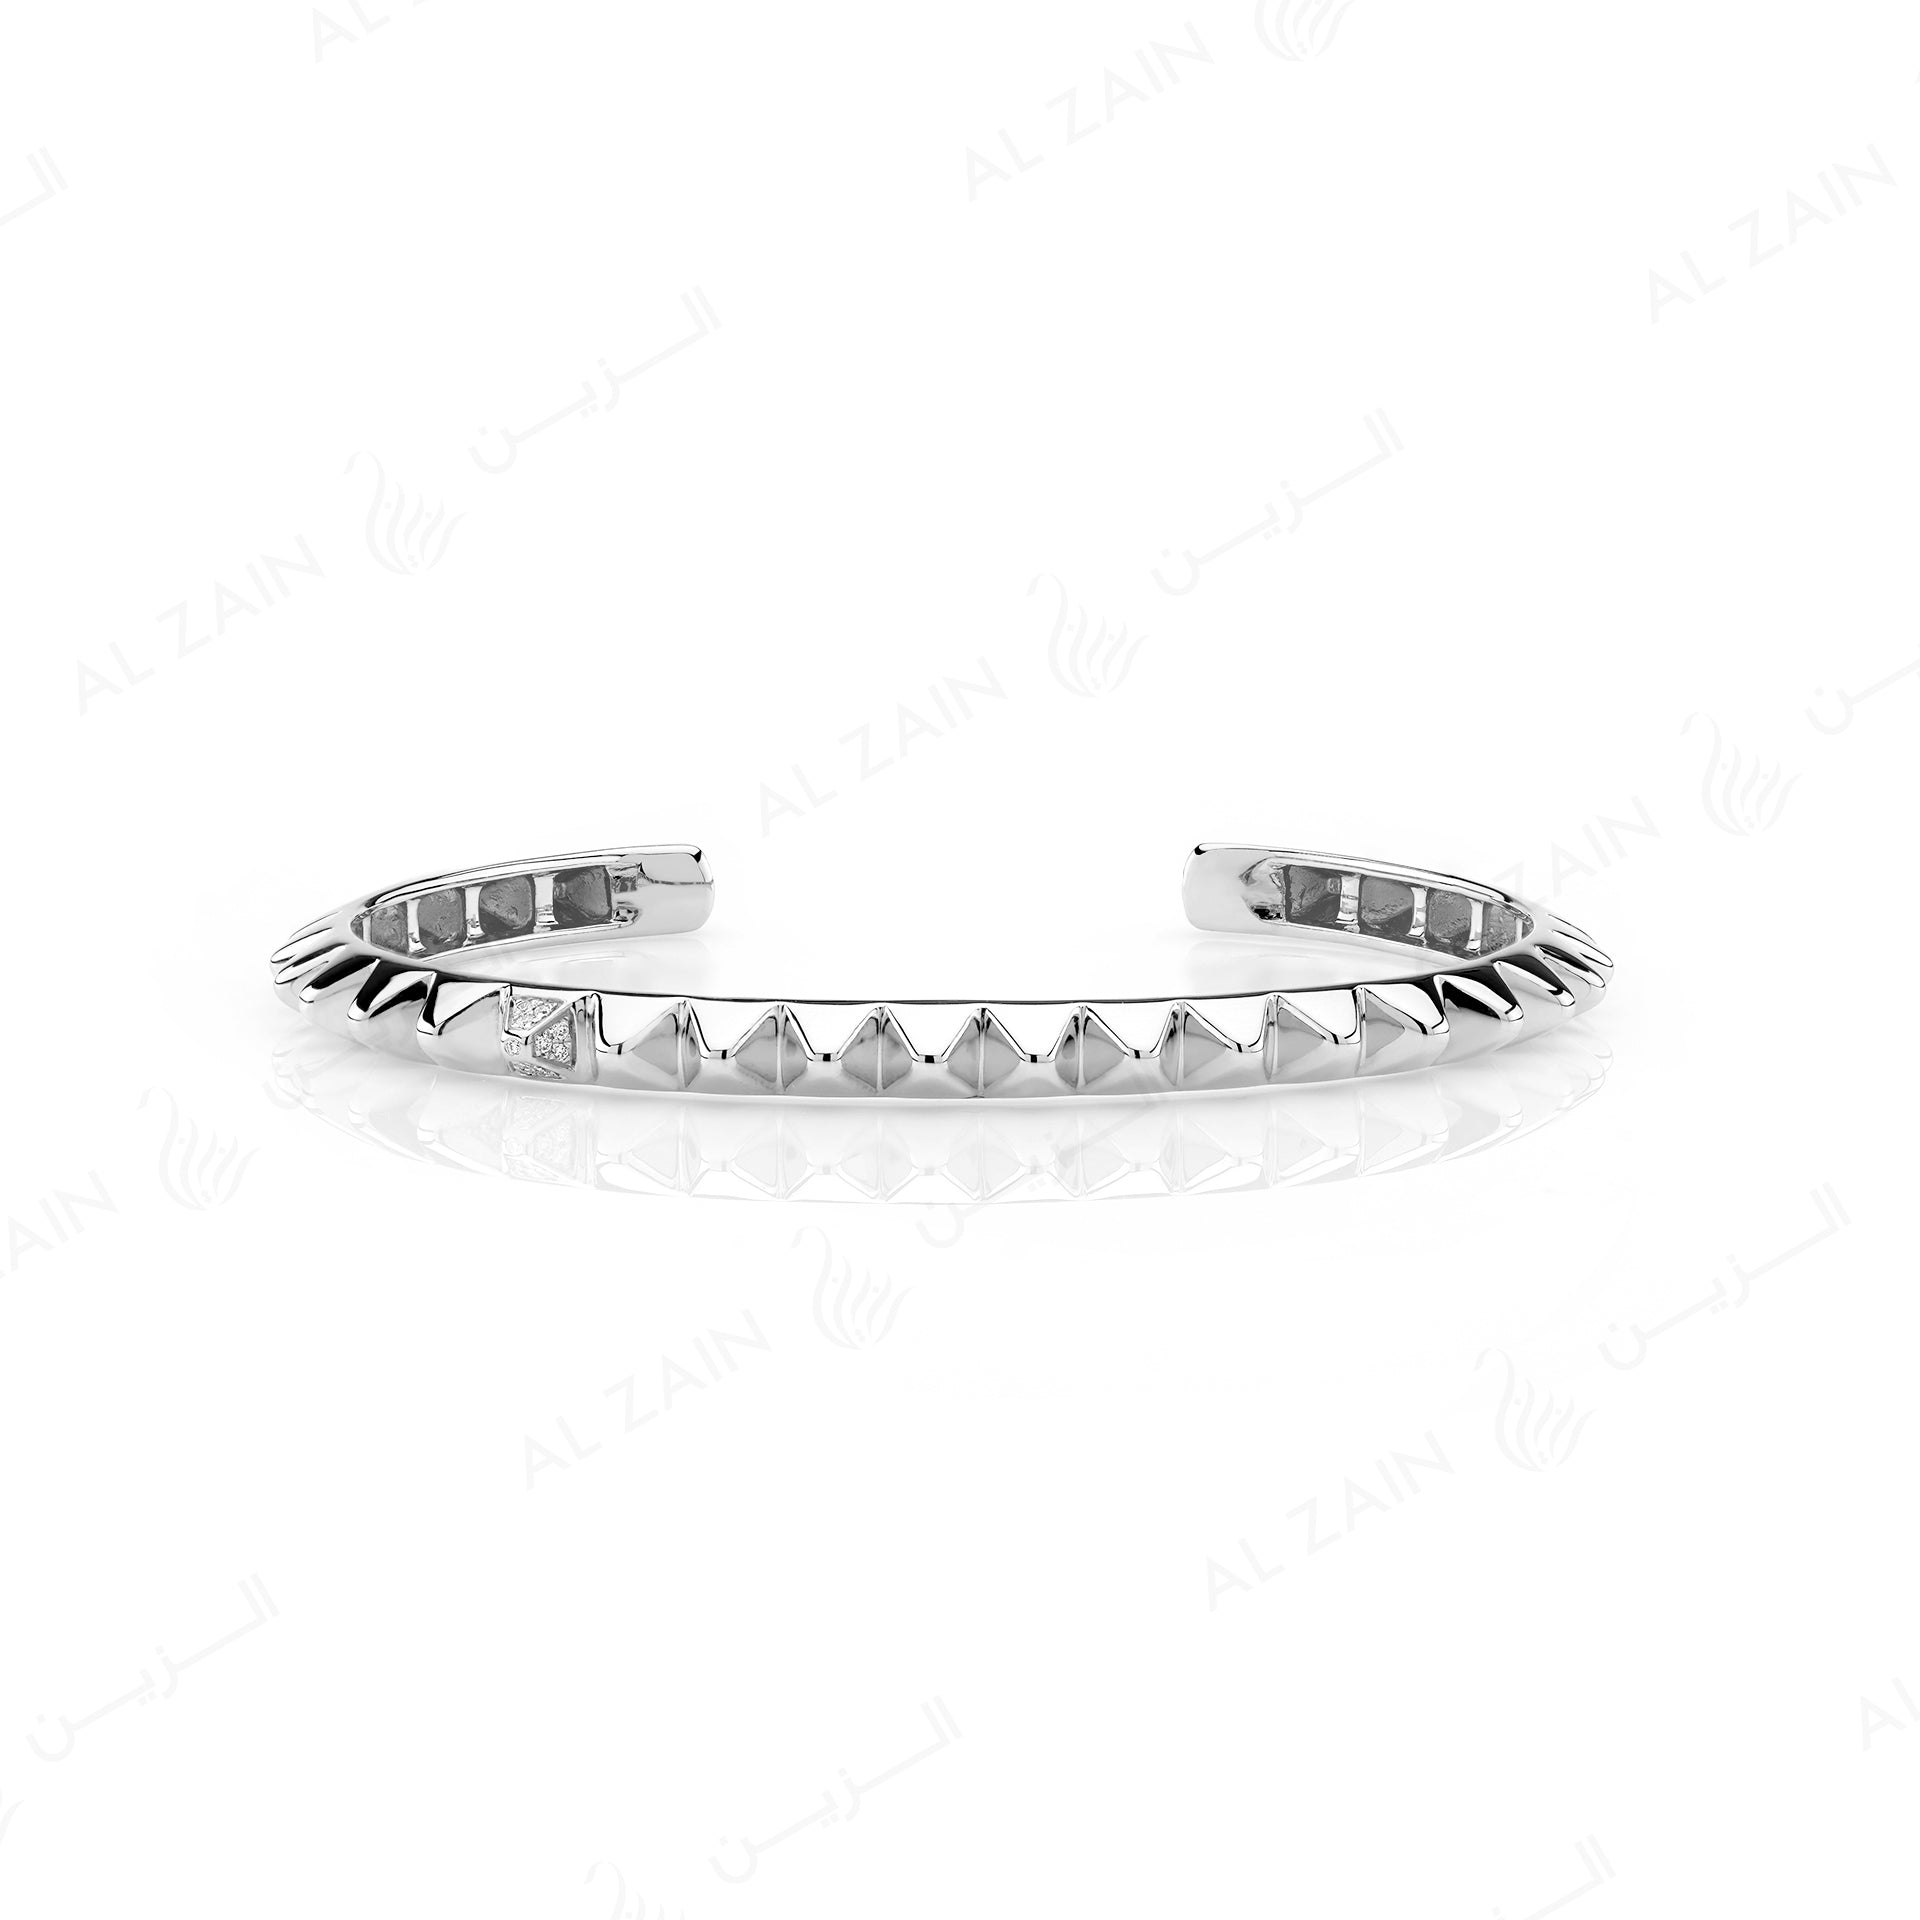 Hab El Hayl 2nd Edition Bangle in White Gold with Diamonds on tip and middle side